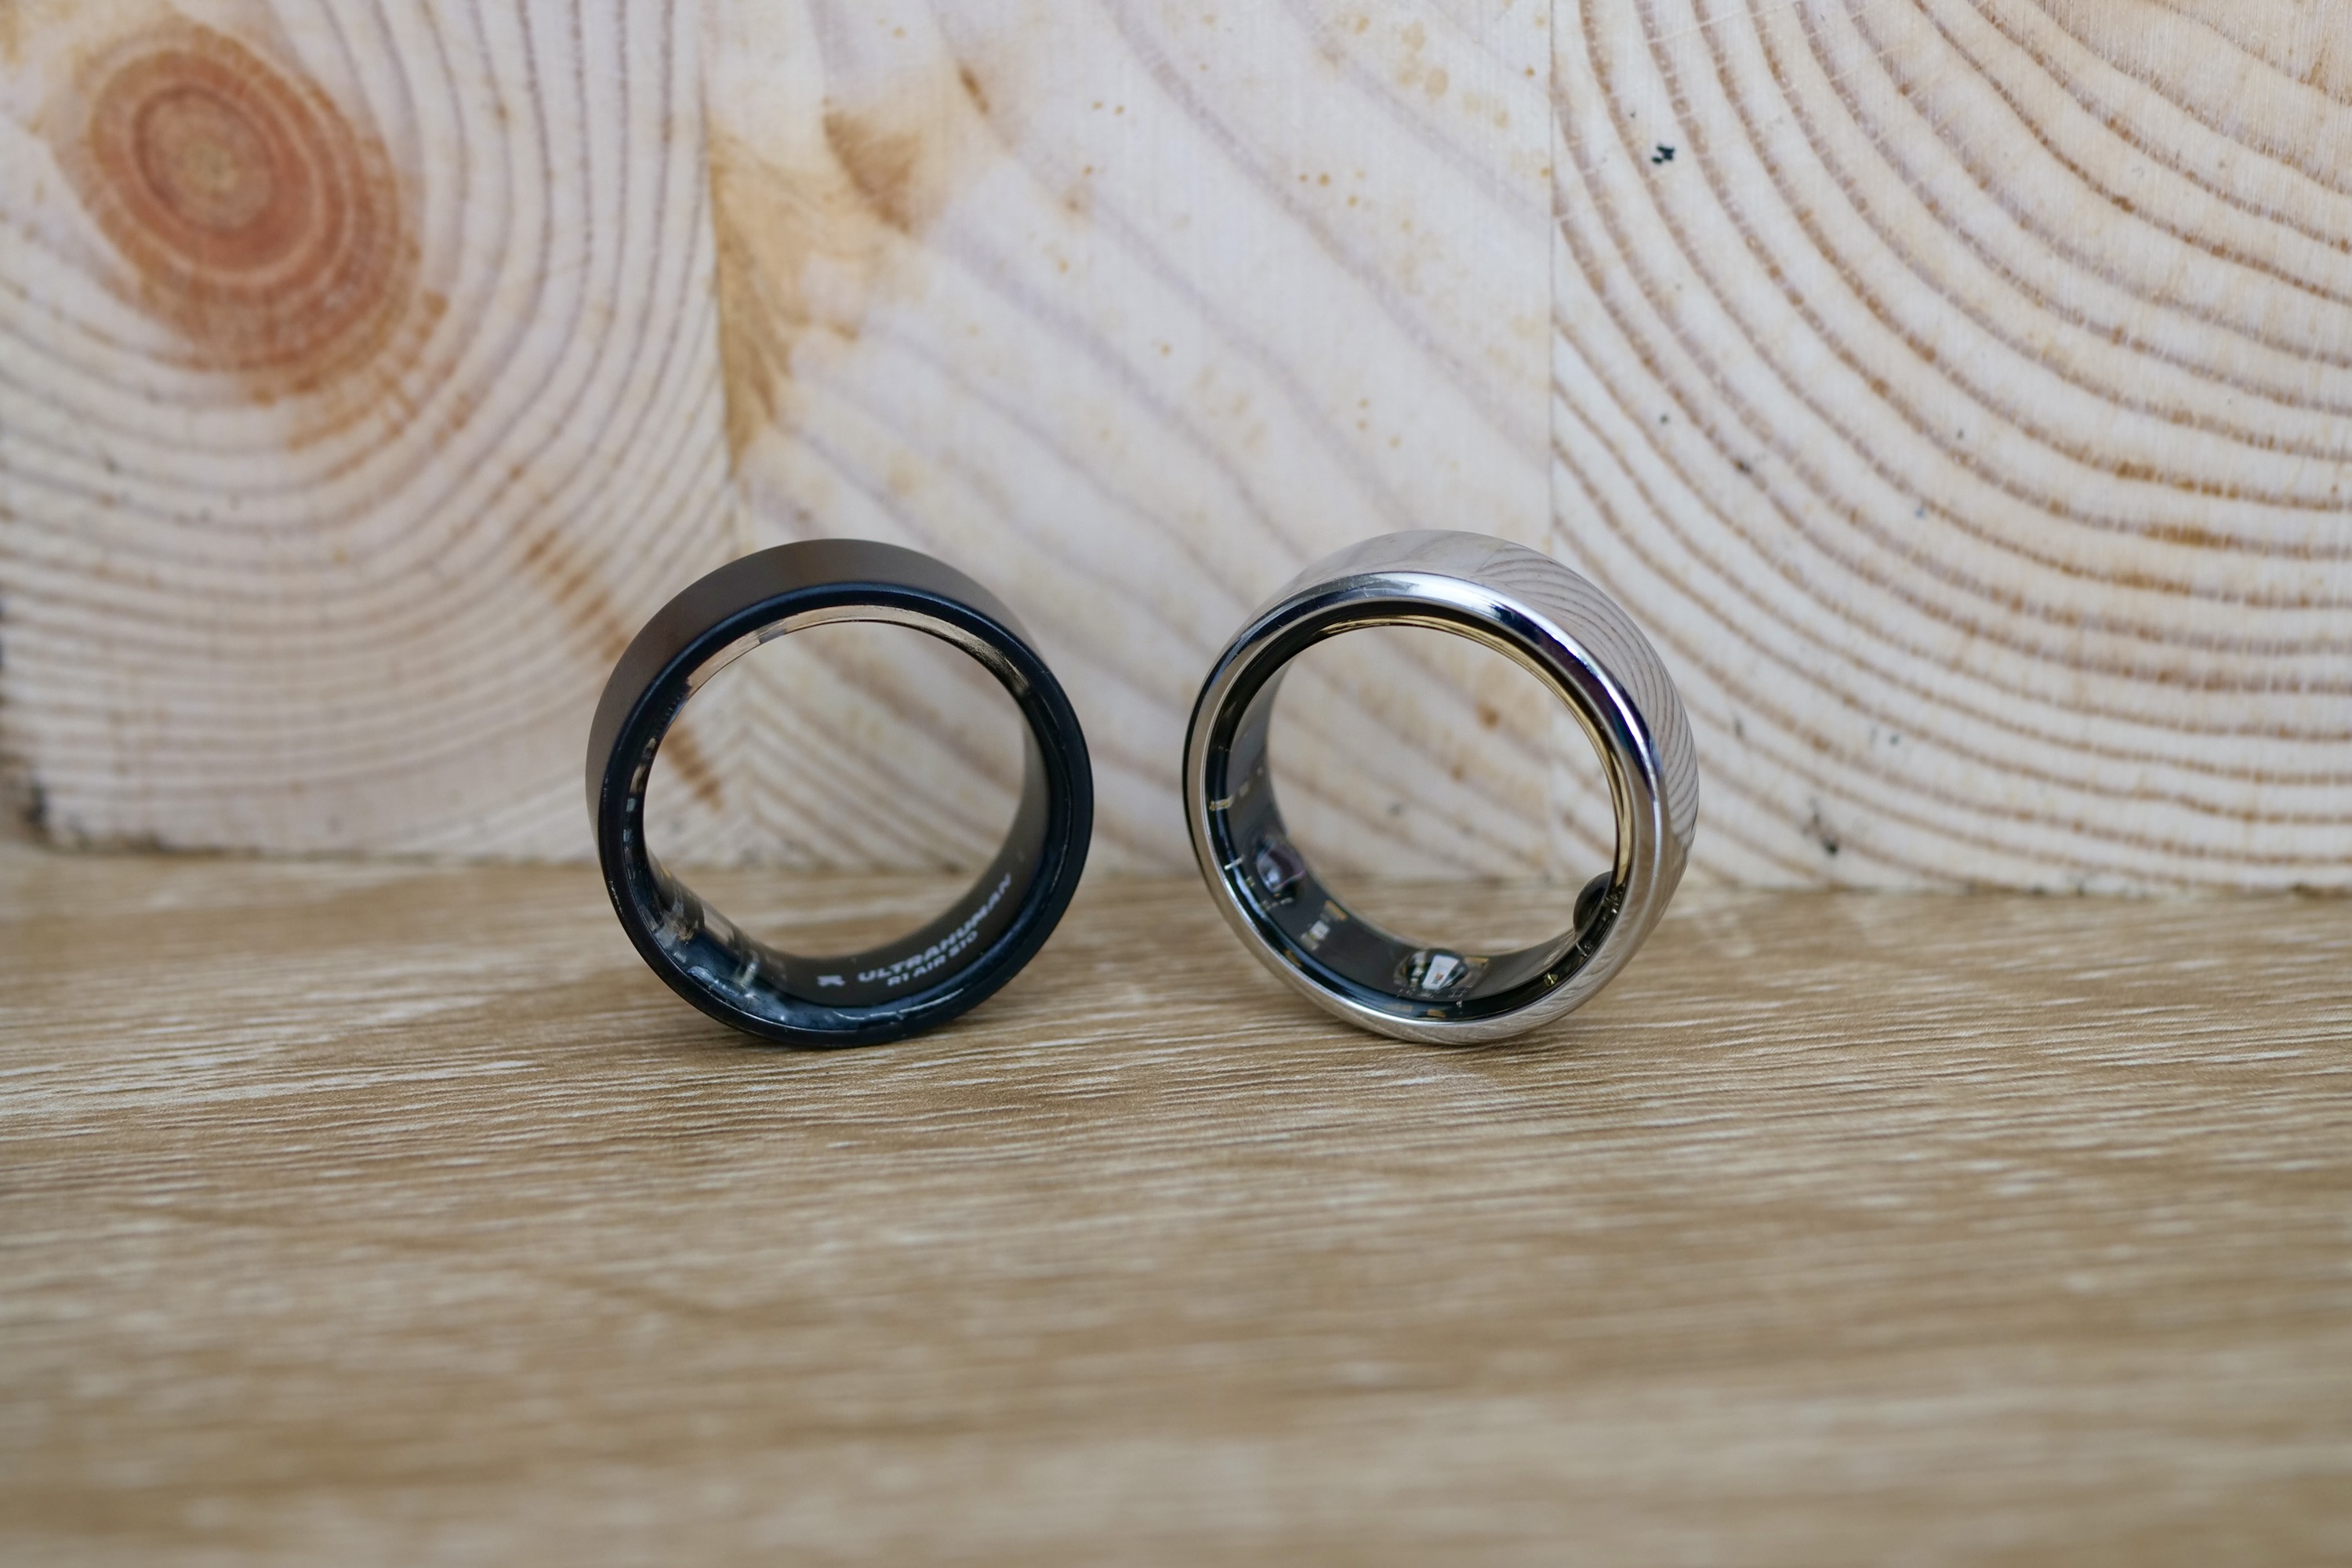 Ultrahuman unveils an ultra-comfortable fitness wearable called the Ultrahuman  Ring Air